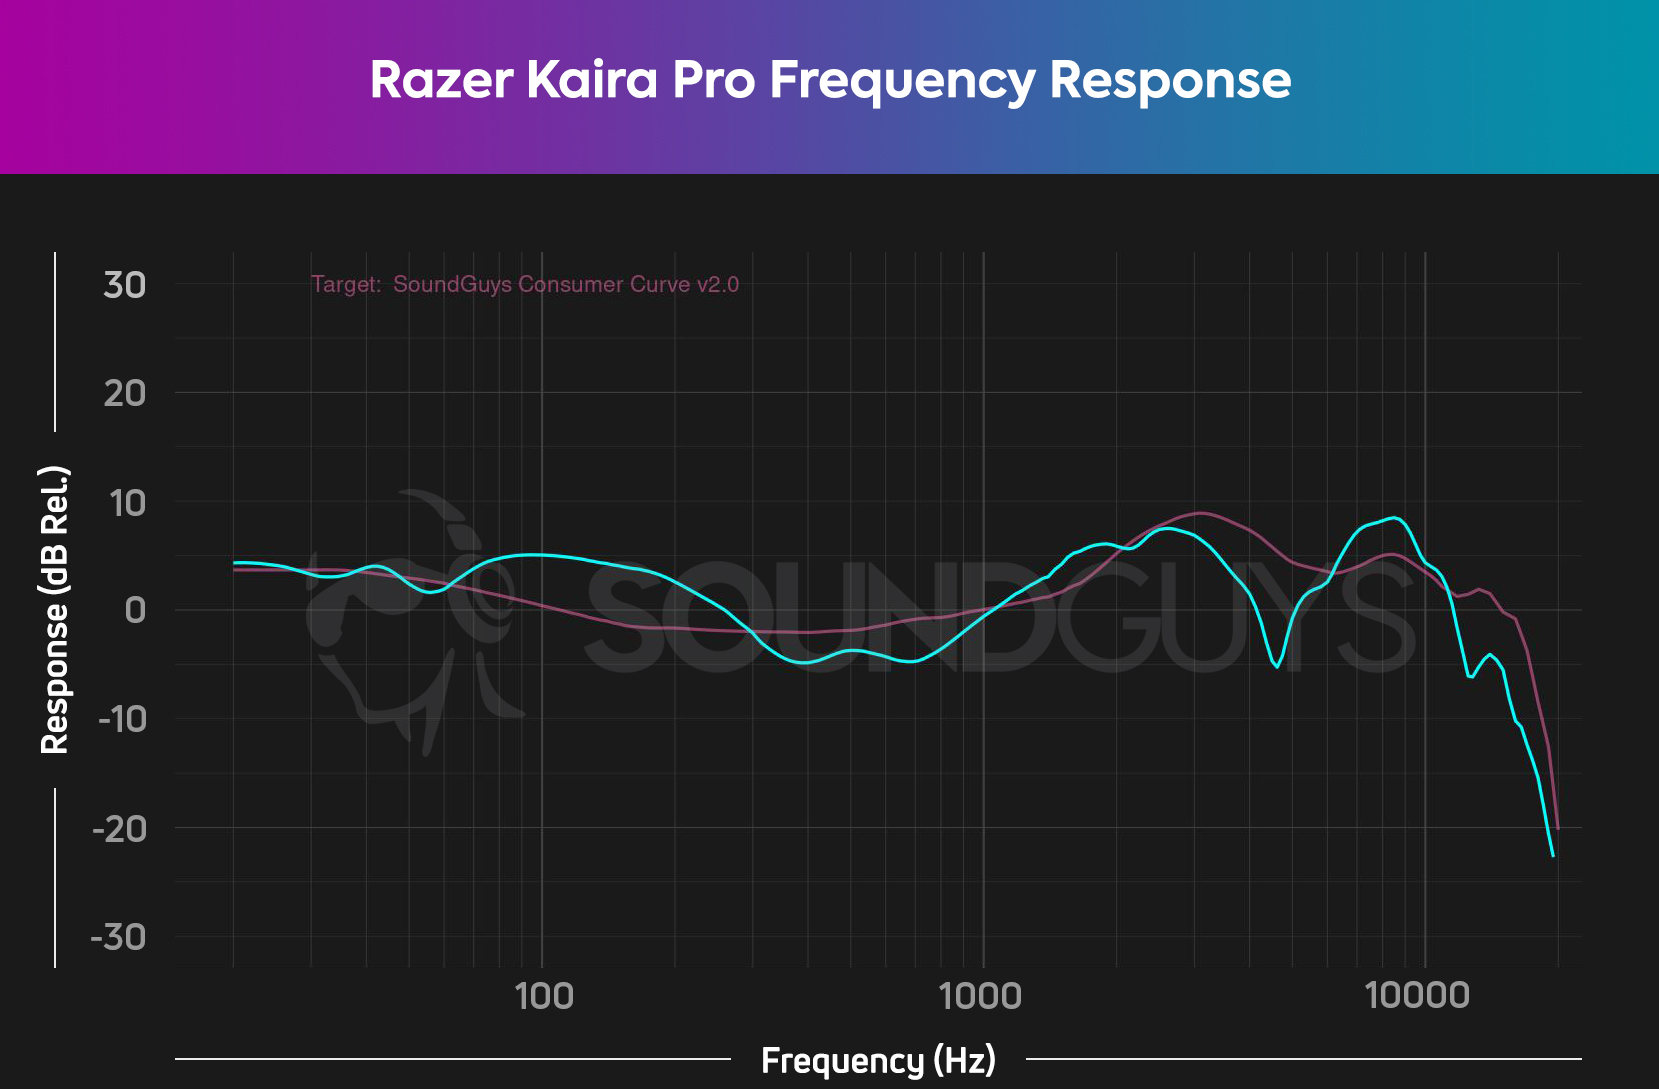 A frequency response chart of the Razer Kaira Pro (cyan) compared to the SoundGuys Consumer Curve V2 (pink), depicts an amplified bass response from the Kaira Pro.